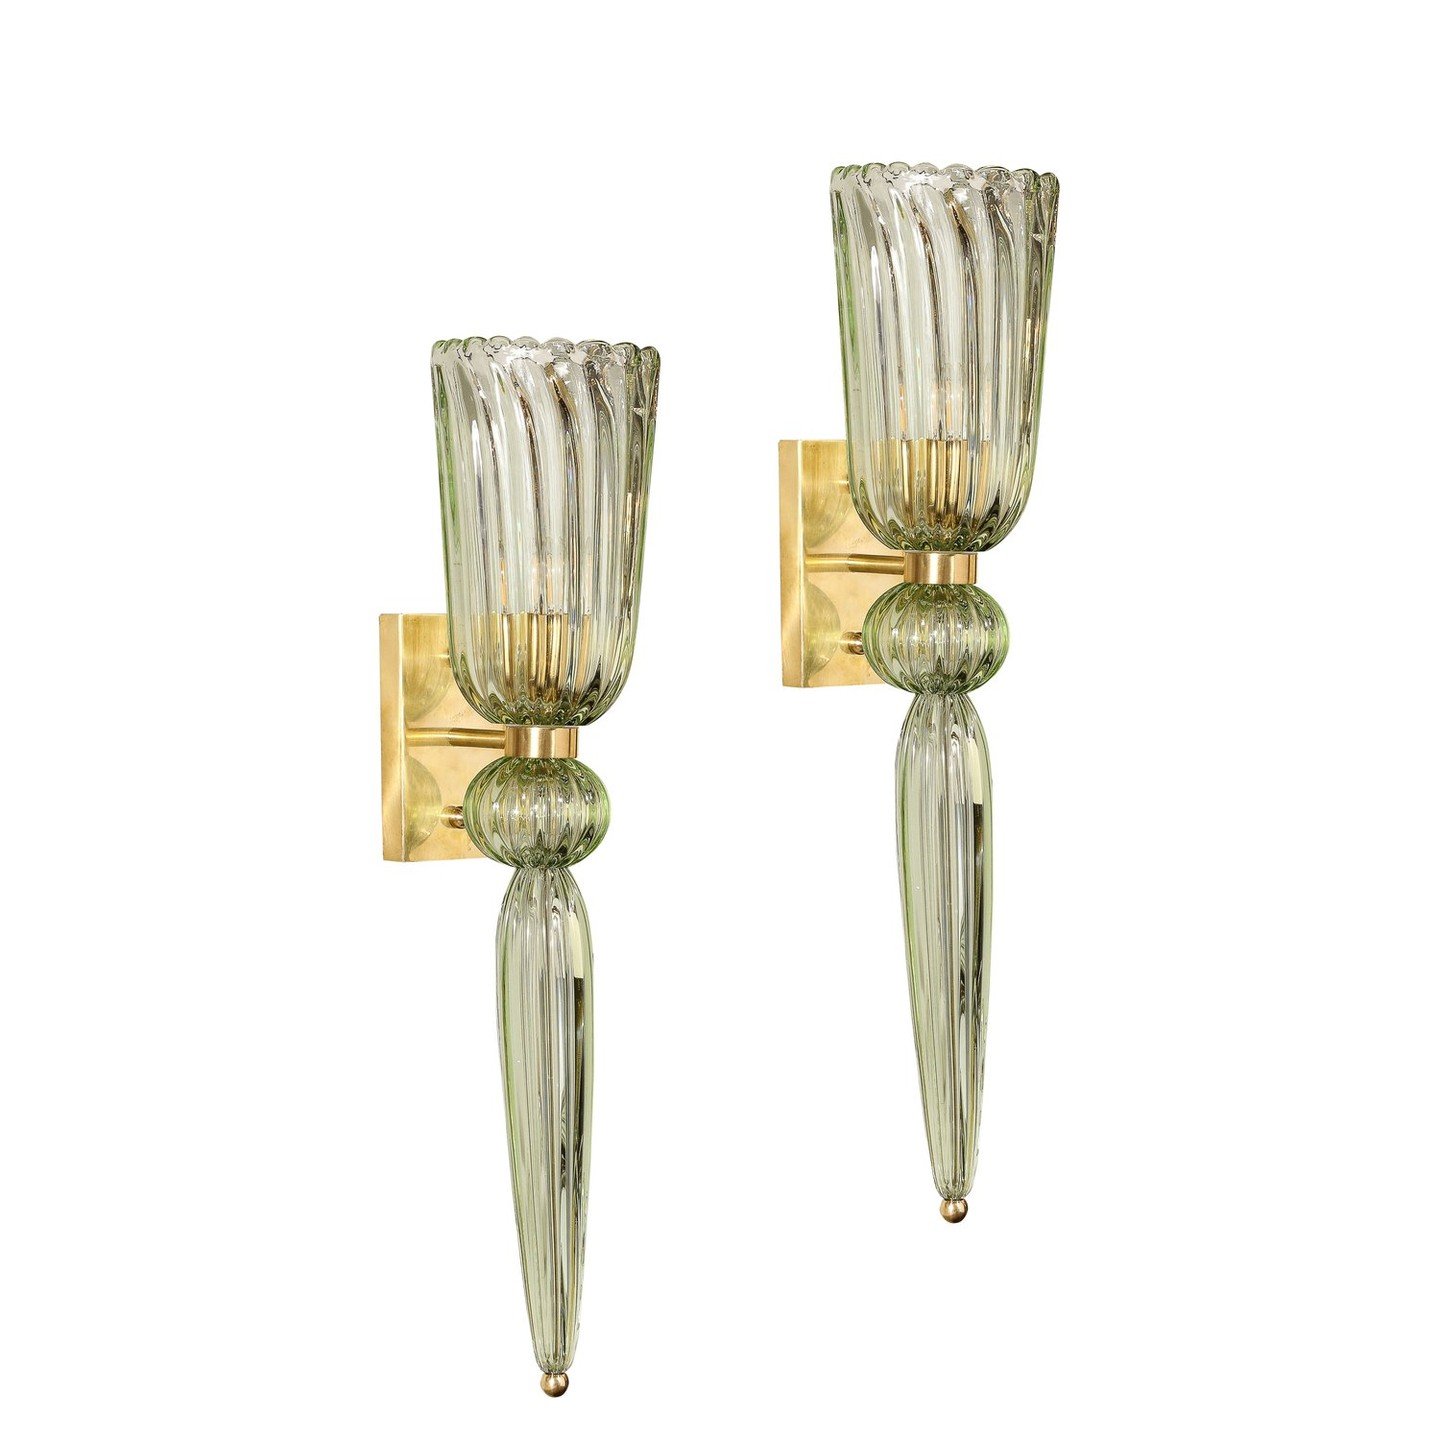 Modernist Celadon Hand-Blown Murano Glass &amp; Brass Sconces with Elongated Drop

This elegantly reserved pair of sconces originates from Italy during the 21st century. Composed in a stunning celadon hue of semi-translucent handblown Murano glass, d